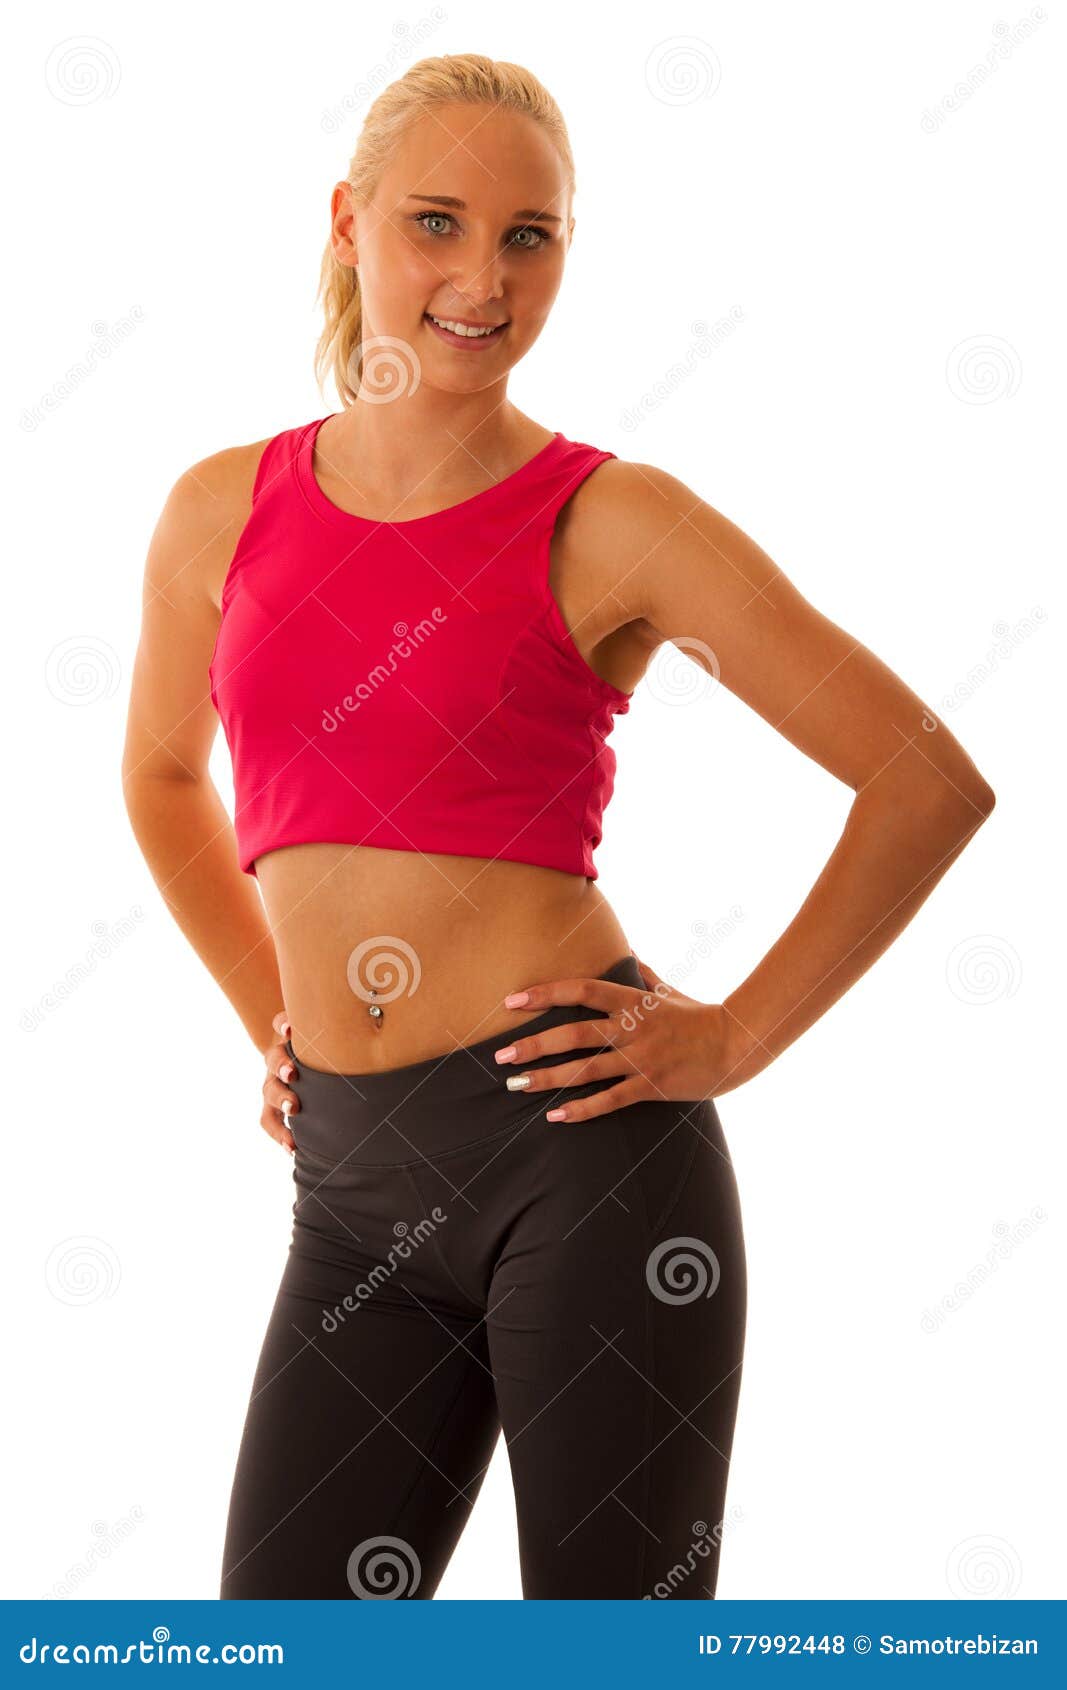 Healthy Lifestyle - Fit Blnde Woman Pose Over White Stock Photo - Image ...